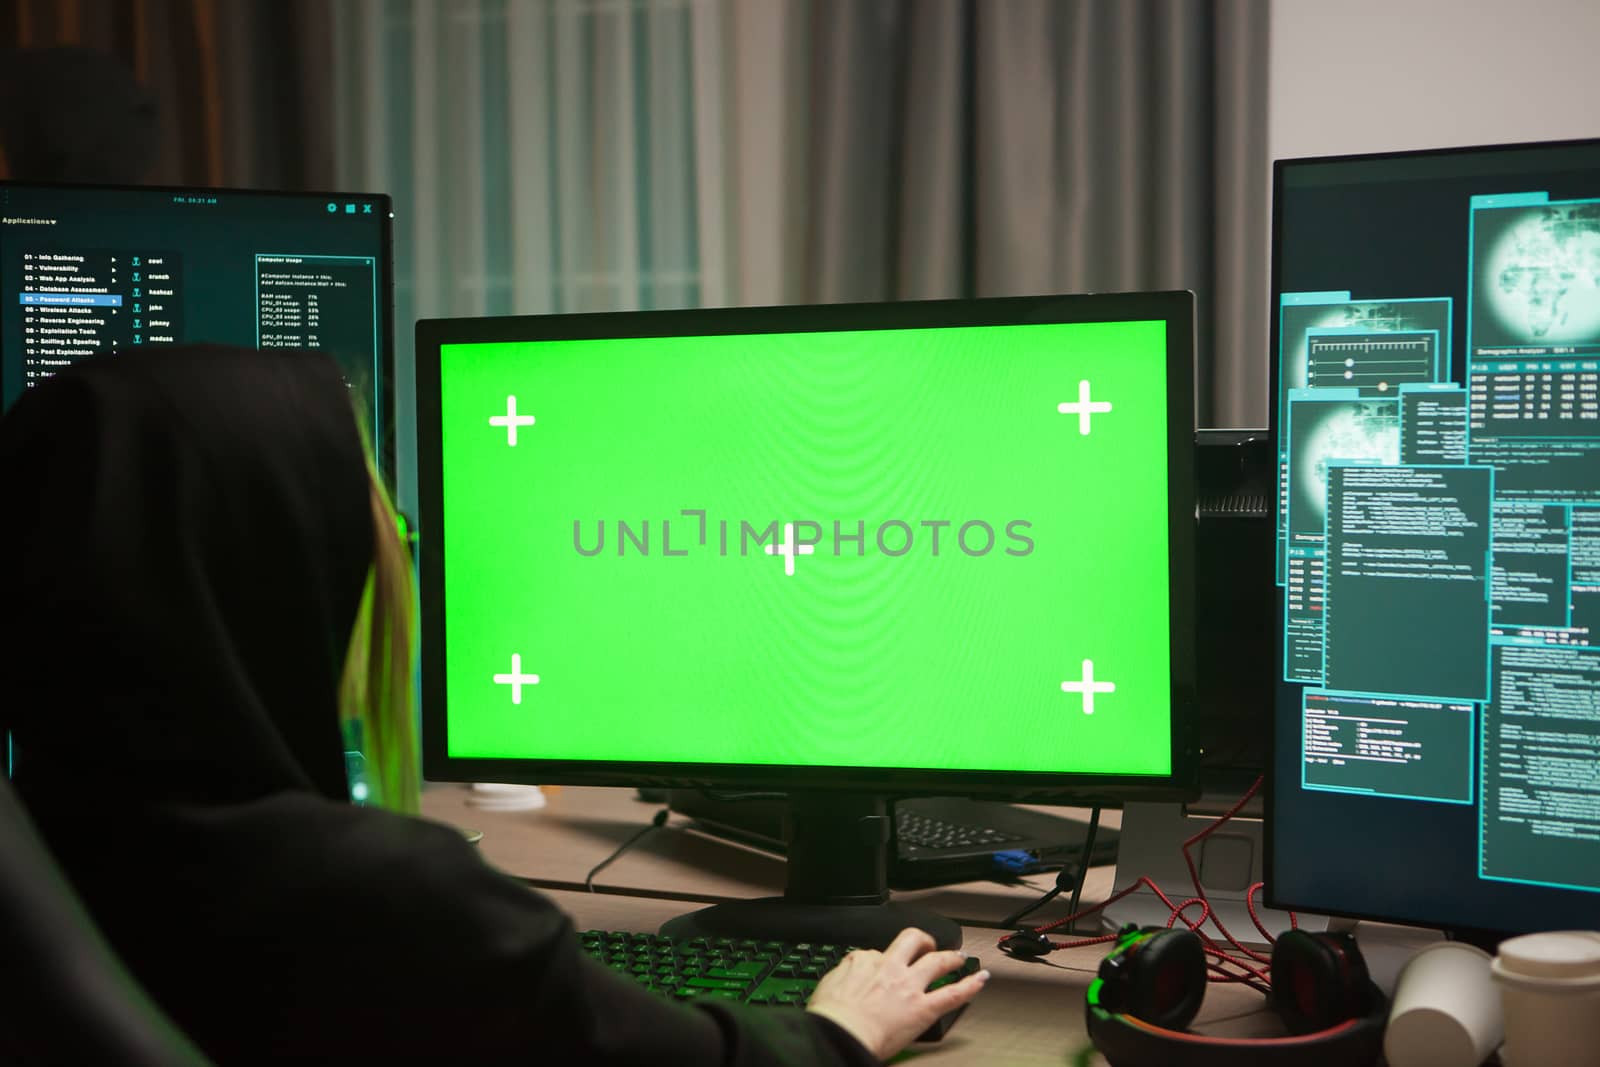 Wanted female hacker in front of computer with green screen. Dark room.